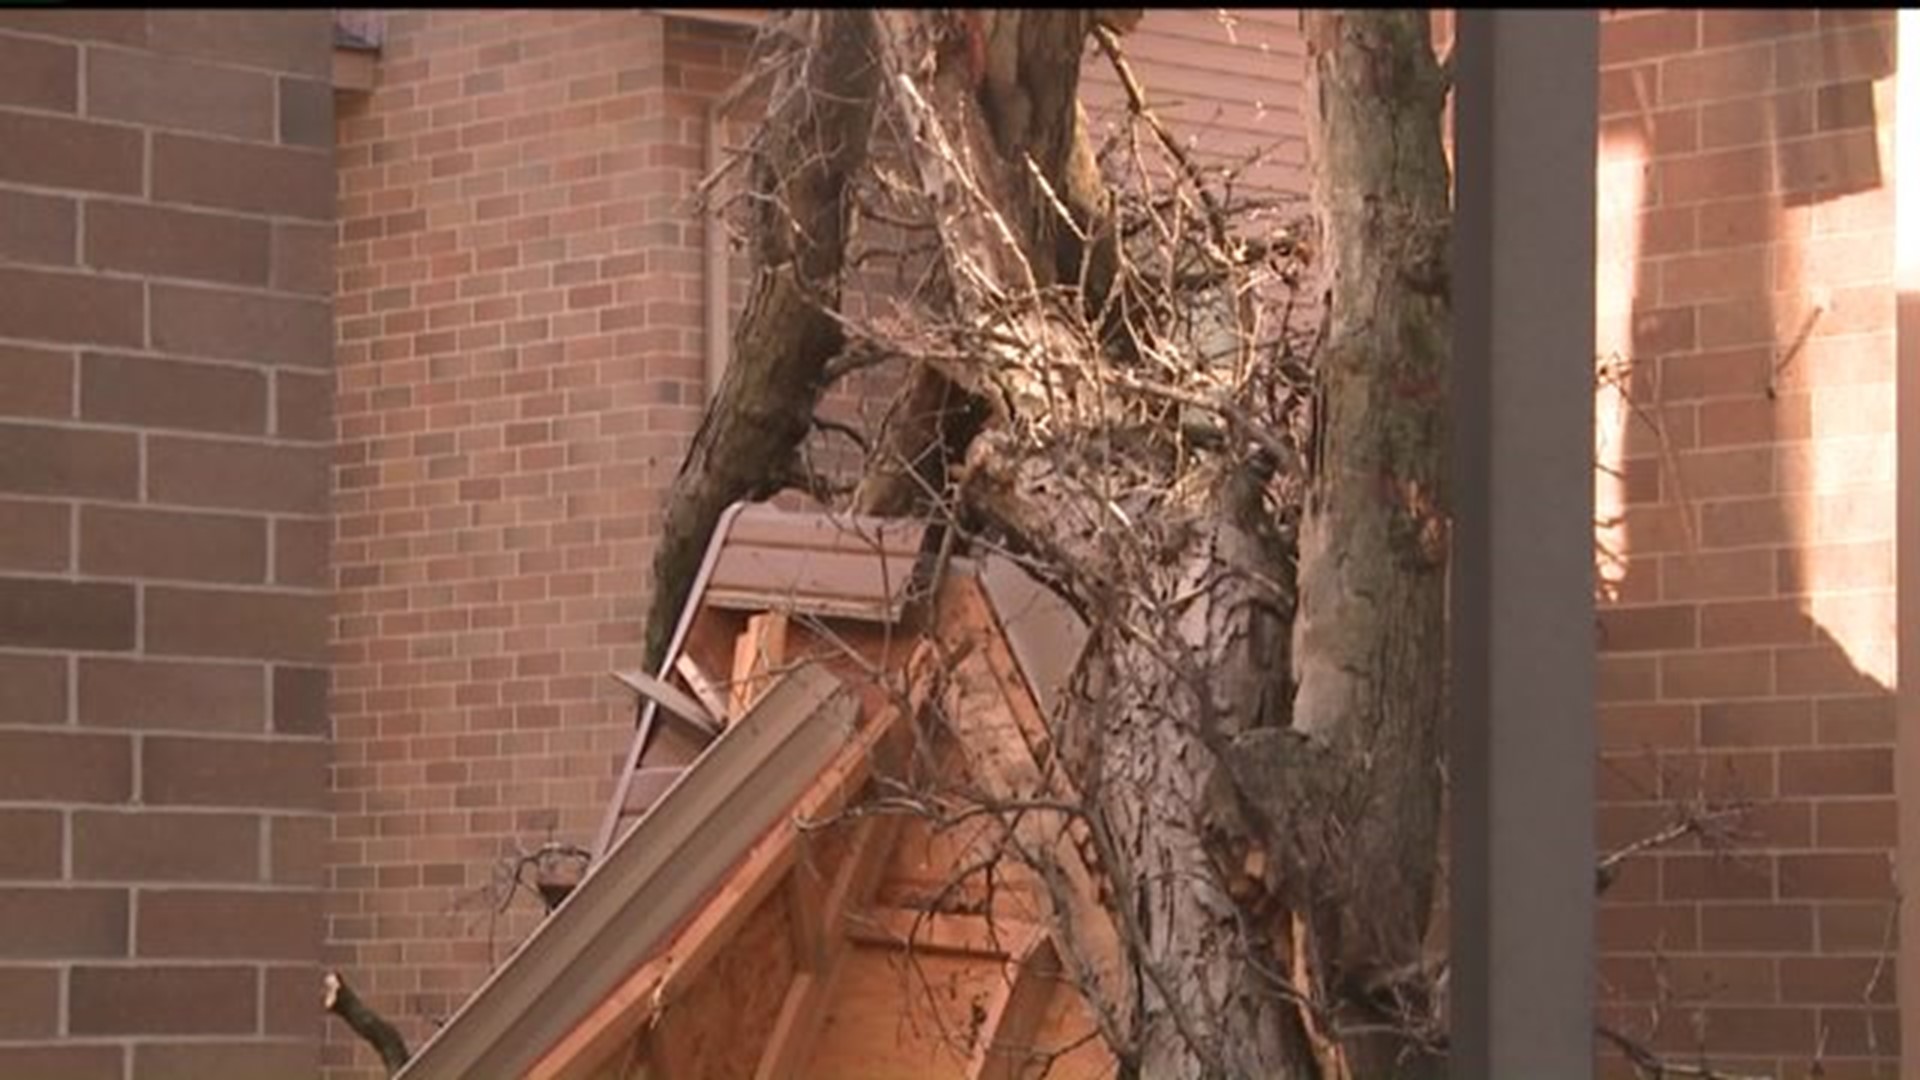 Augie students safe after tree falls on home